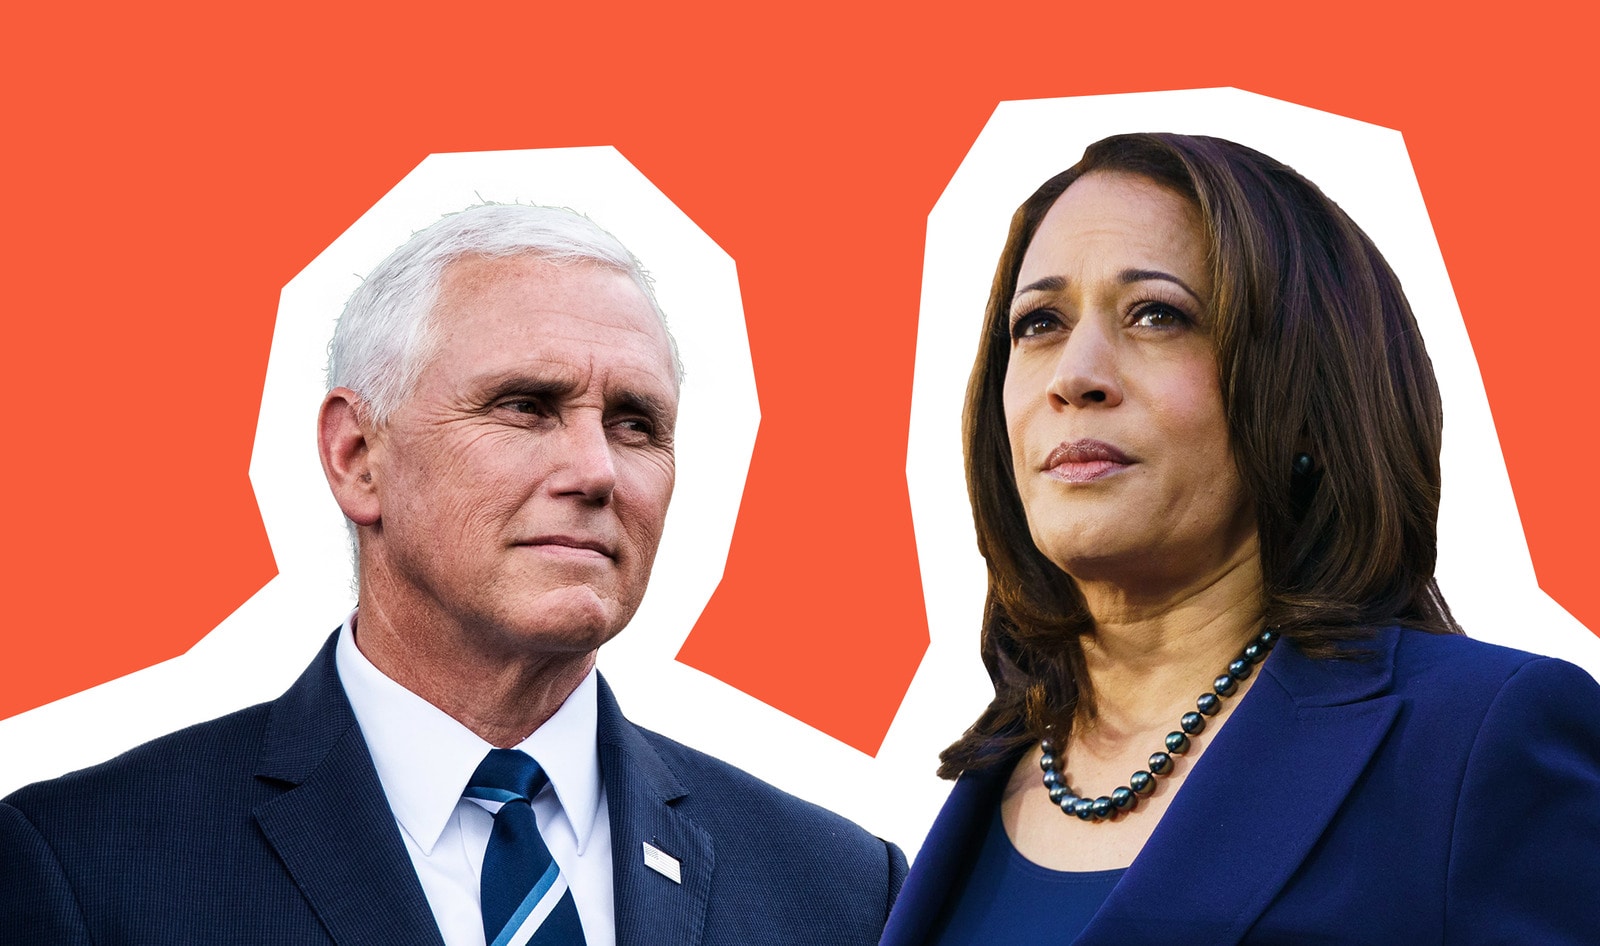 Mike Pence Thinks Kamala Harris Is Trying to “Cut America’s Meat”